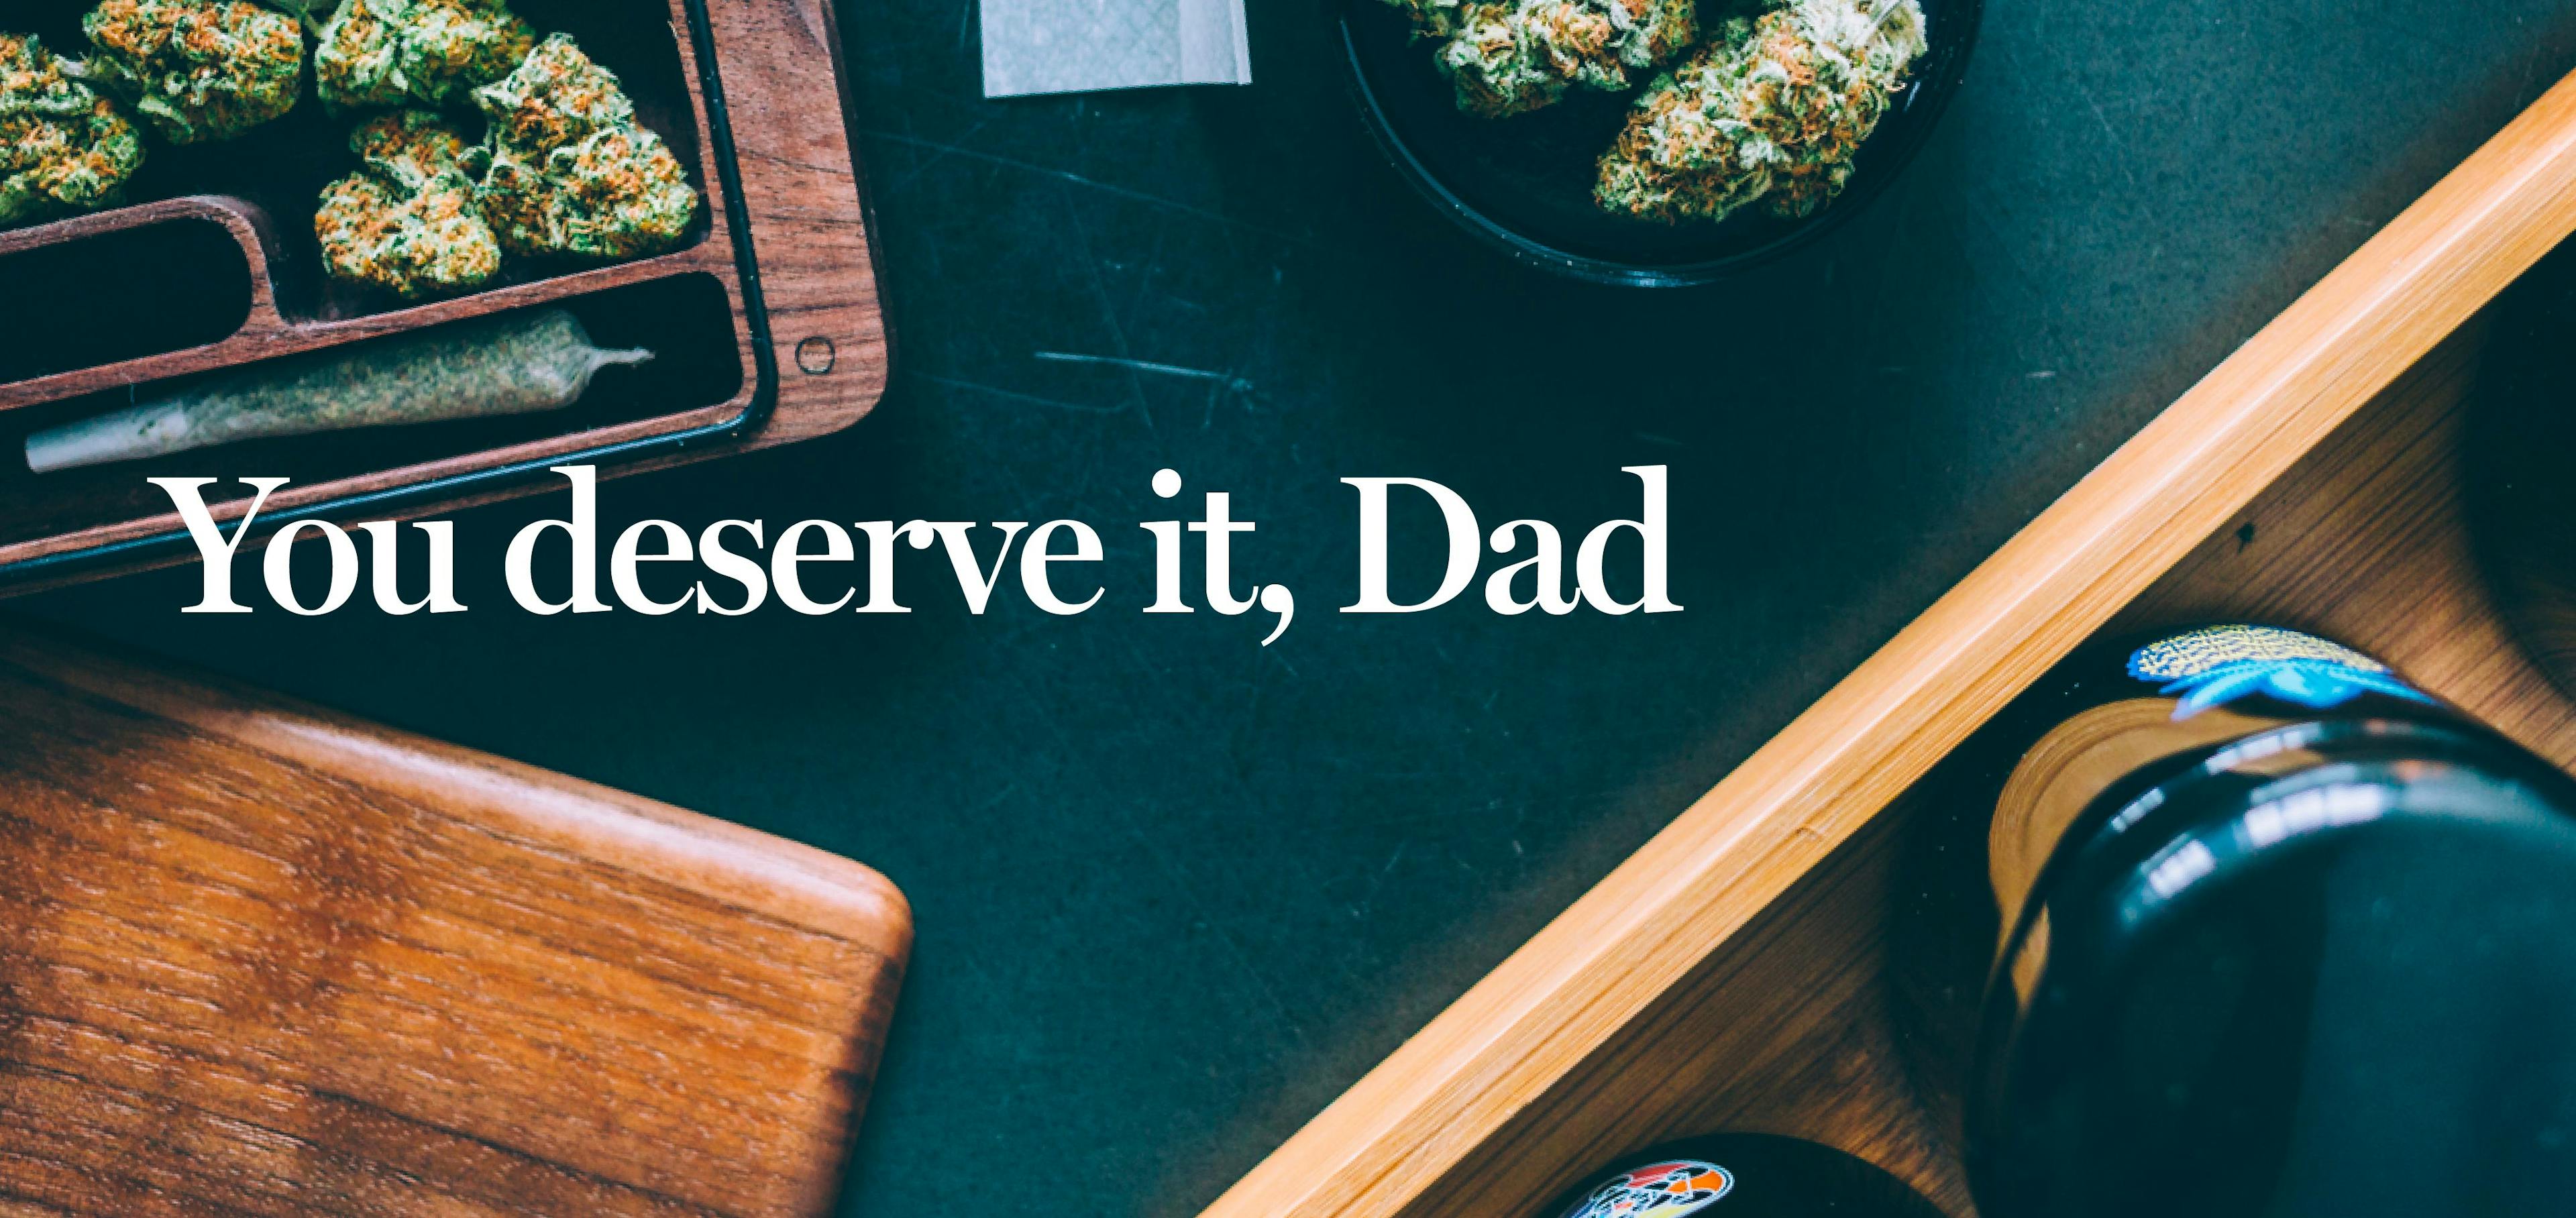 A cannabis-inspired shopping guide for dads of all kinds.